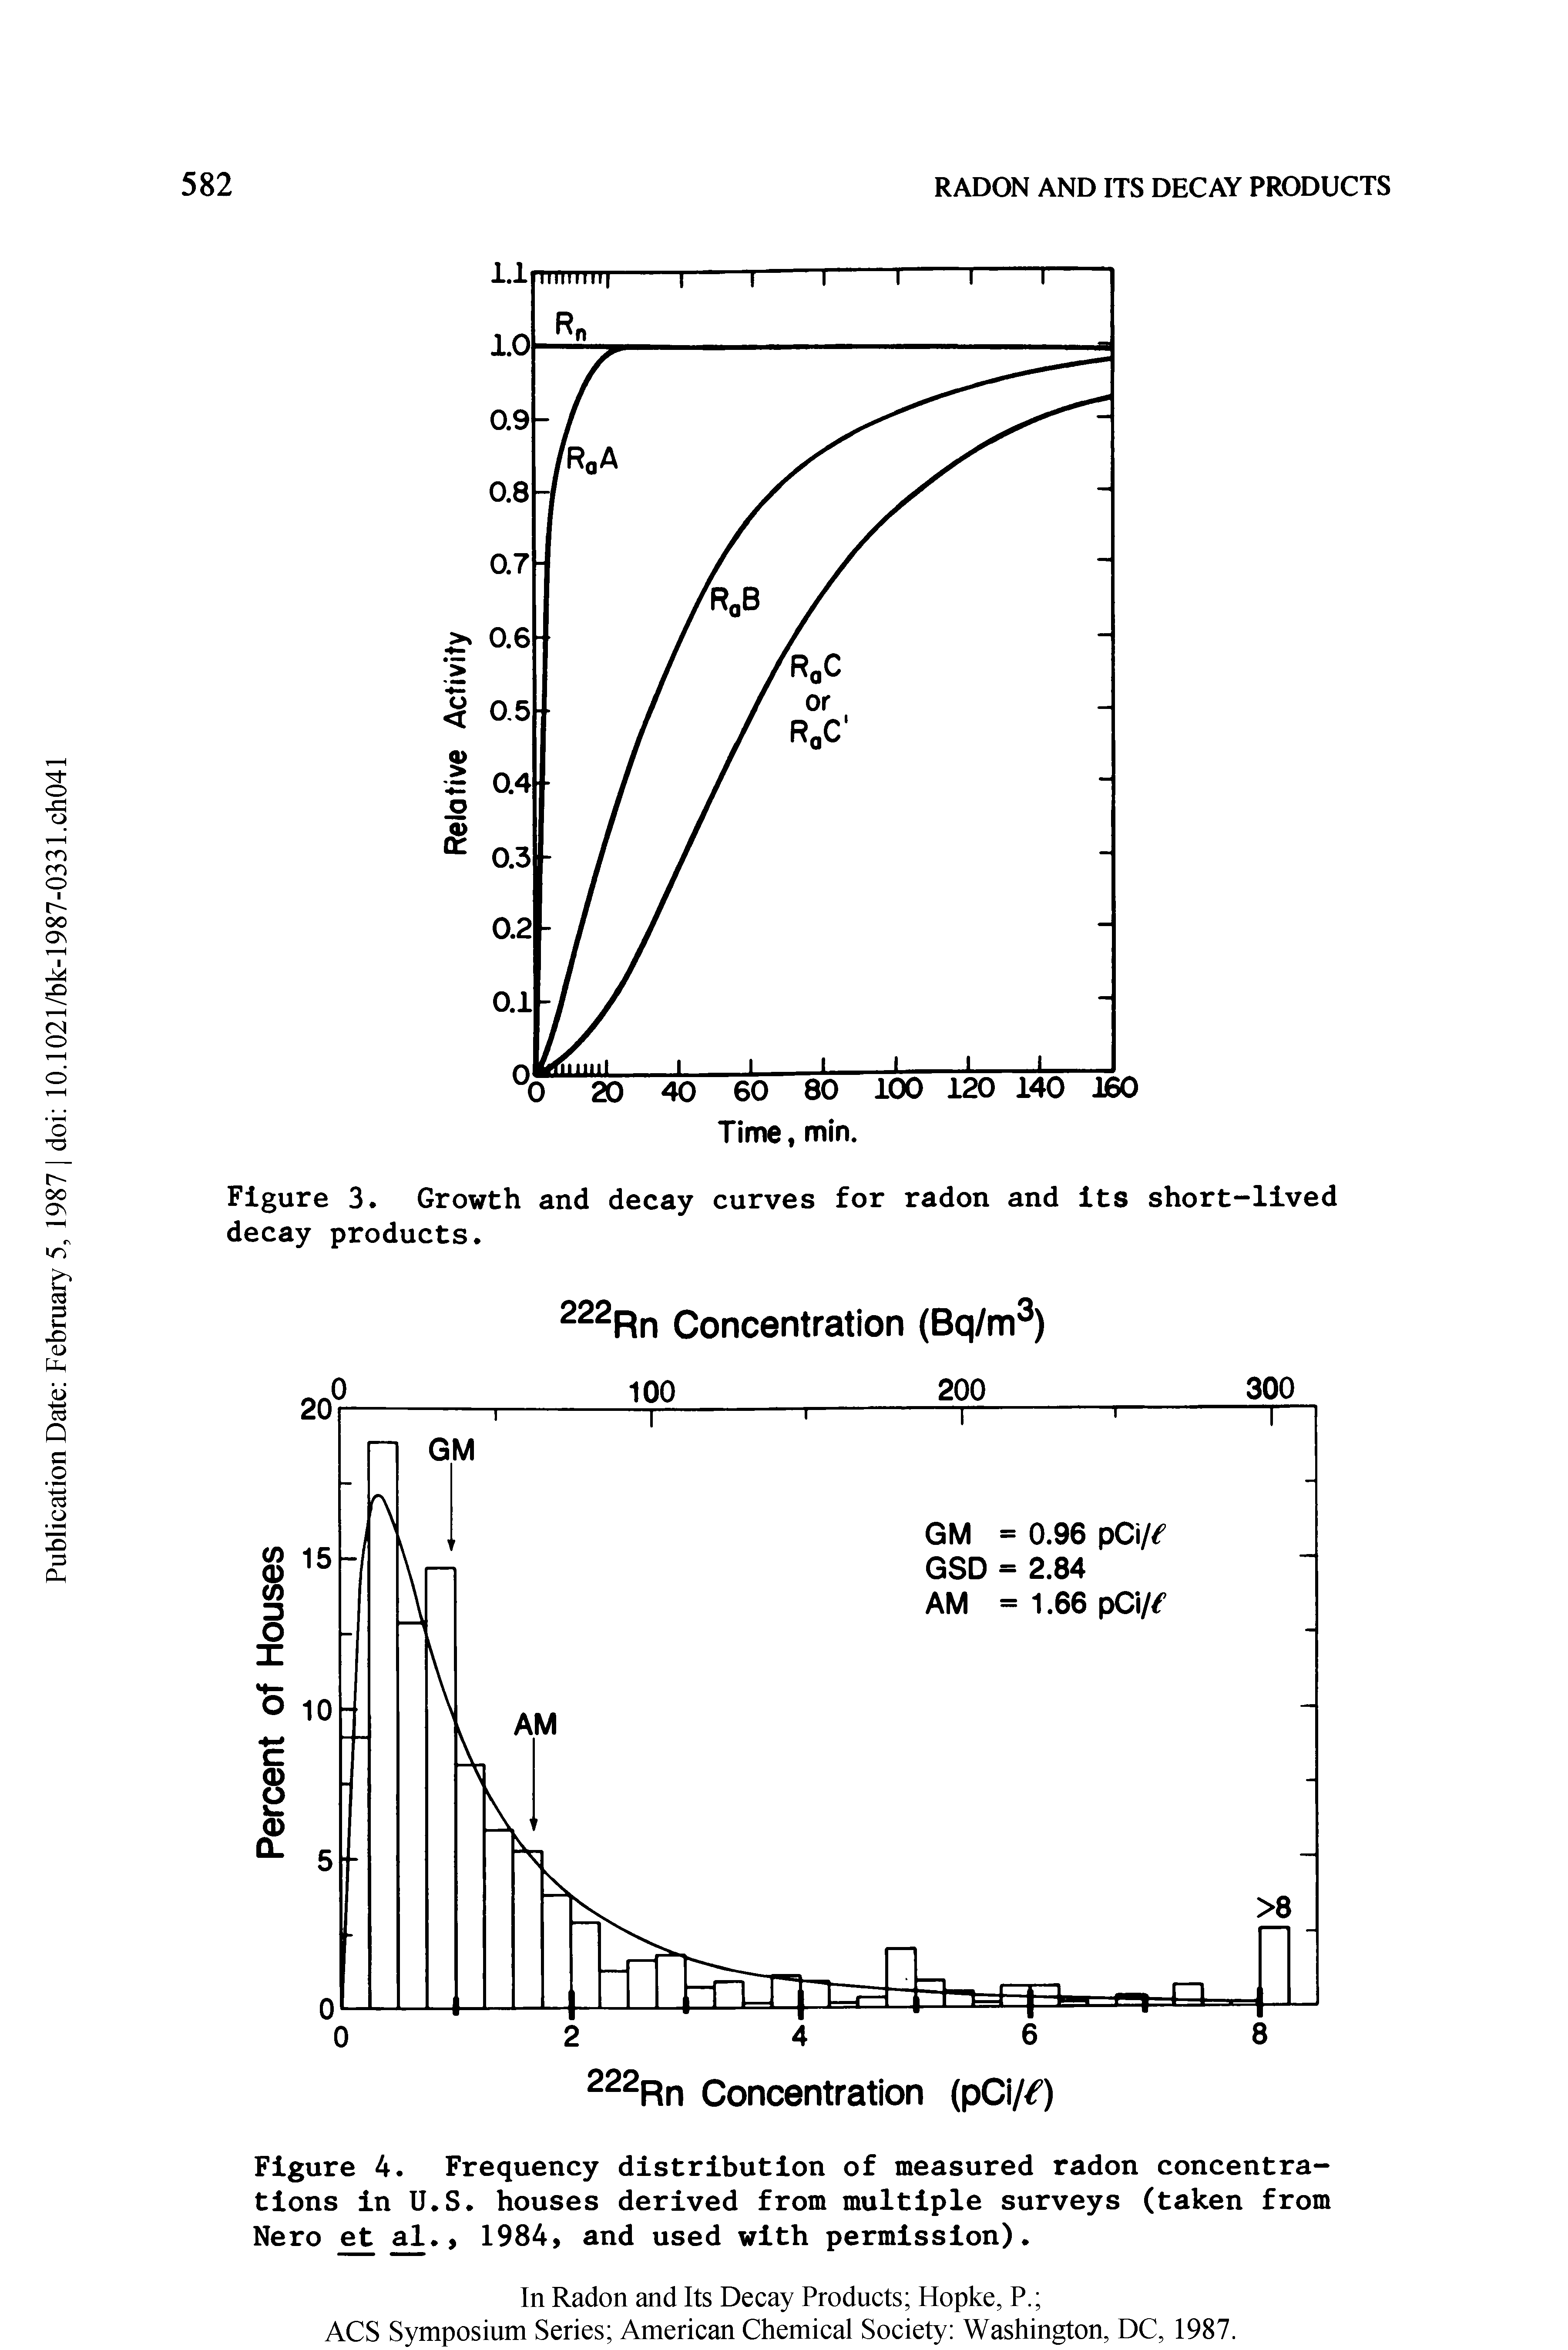 Figure 4. Frequency distribution of measured radon concentrations in U.S. houses derived from multiple surveys (taken from Nero et al., 1984, and used with permission).